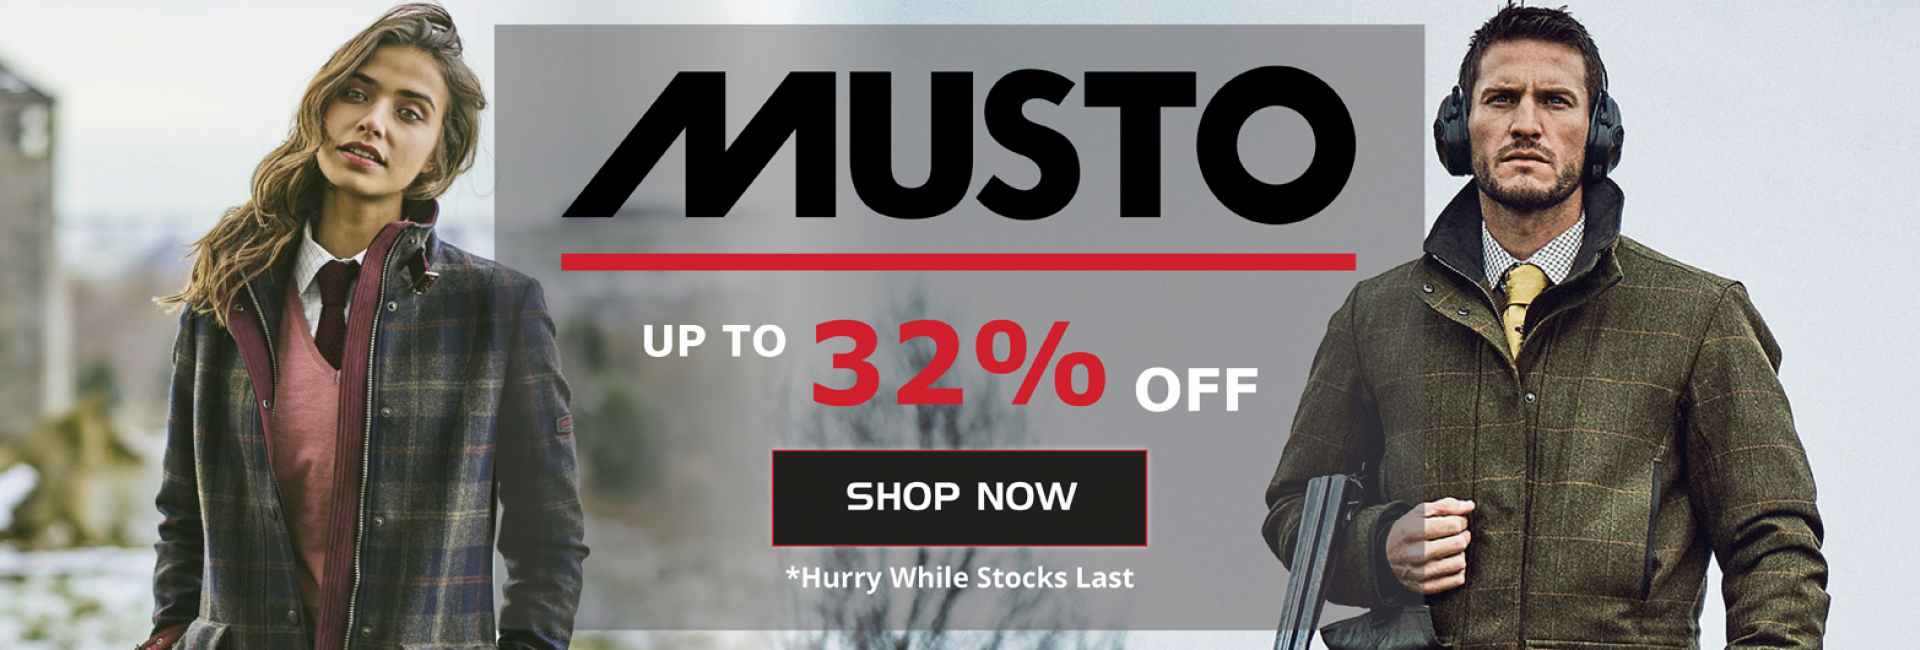 Musto 32% OFF Banner